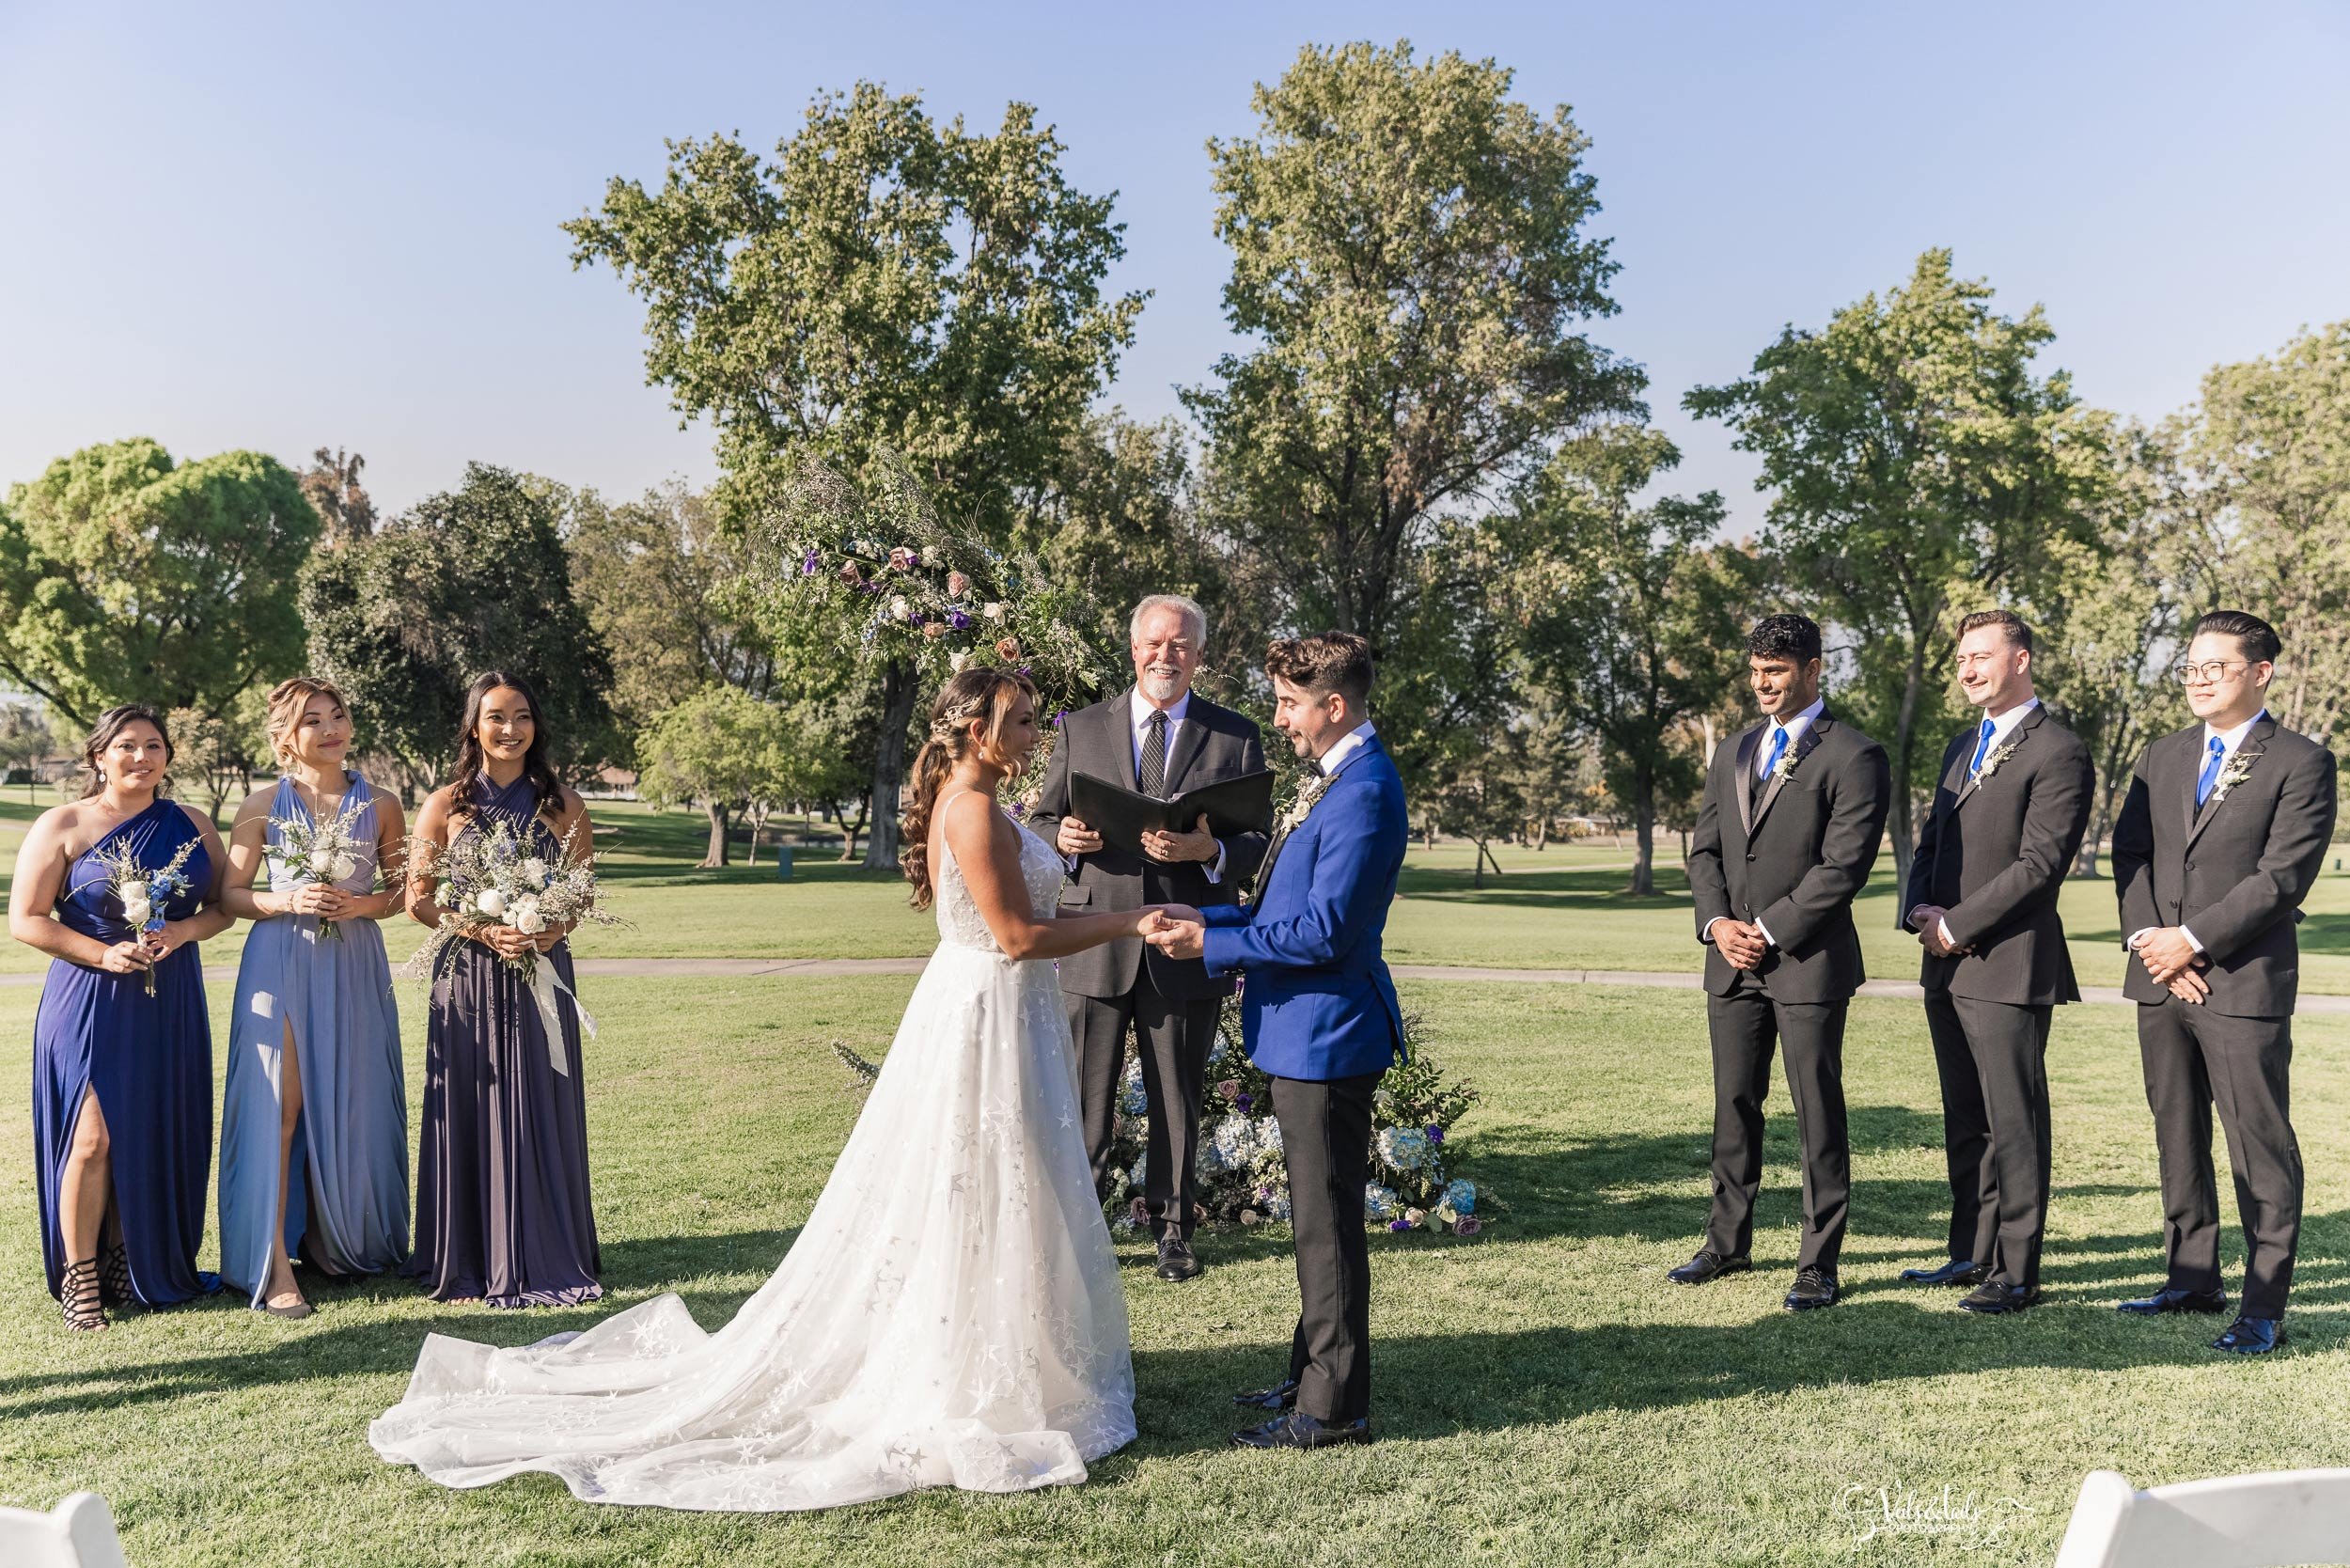 moon and stars themed wedding, Veils &amp; Tails Photography, Santa Barbara photographer, South Hills Country Club